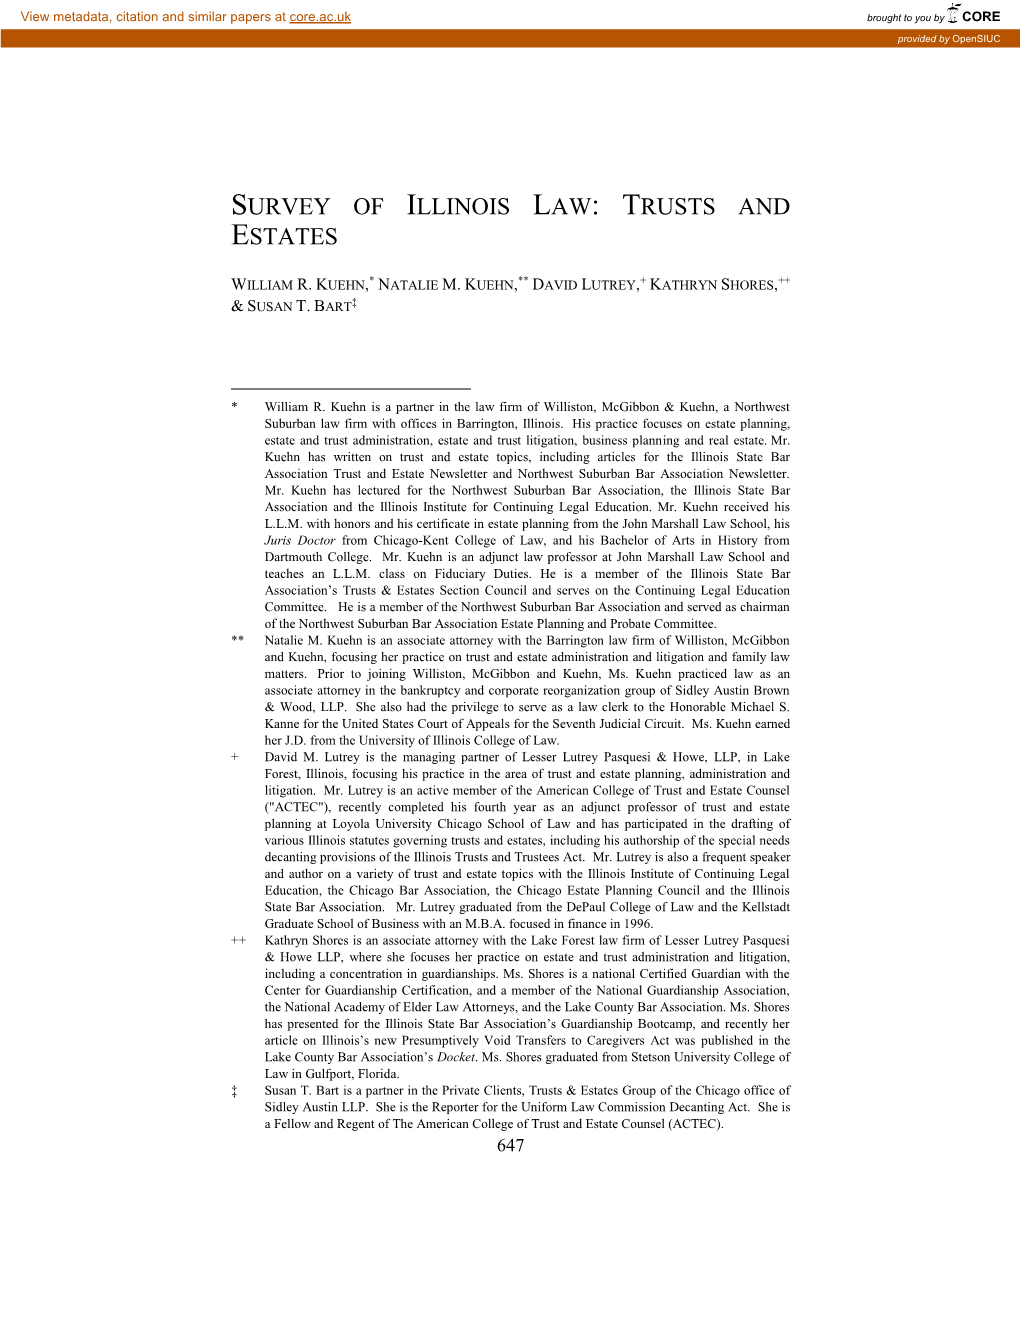 Survey of Illinois Law: Trusts and Estates